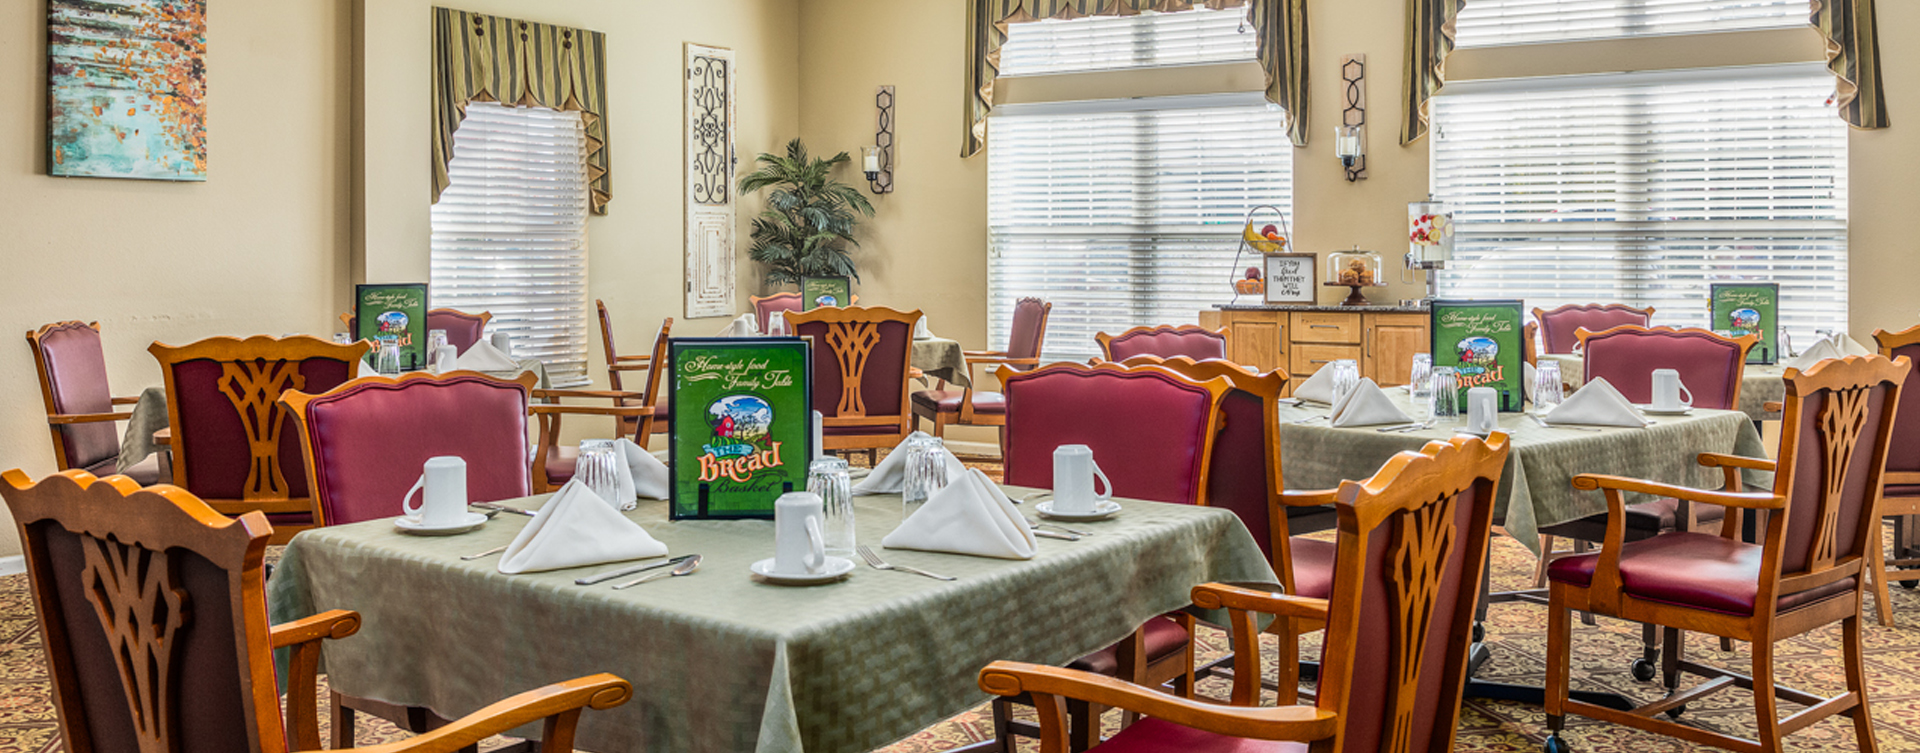 Enjoy restaurant -style meals served three times a day in our dining room at Bickford of Fort Dodge